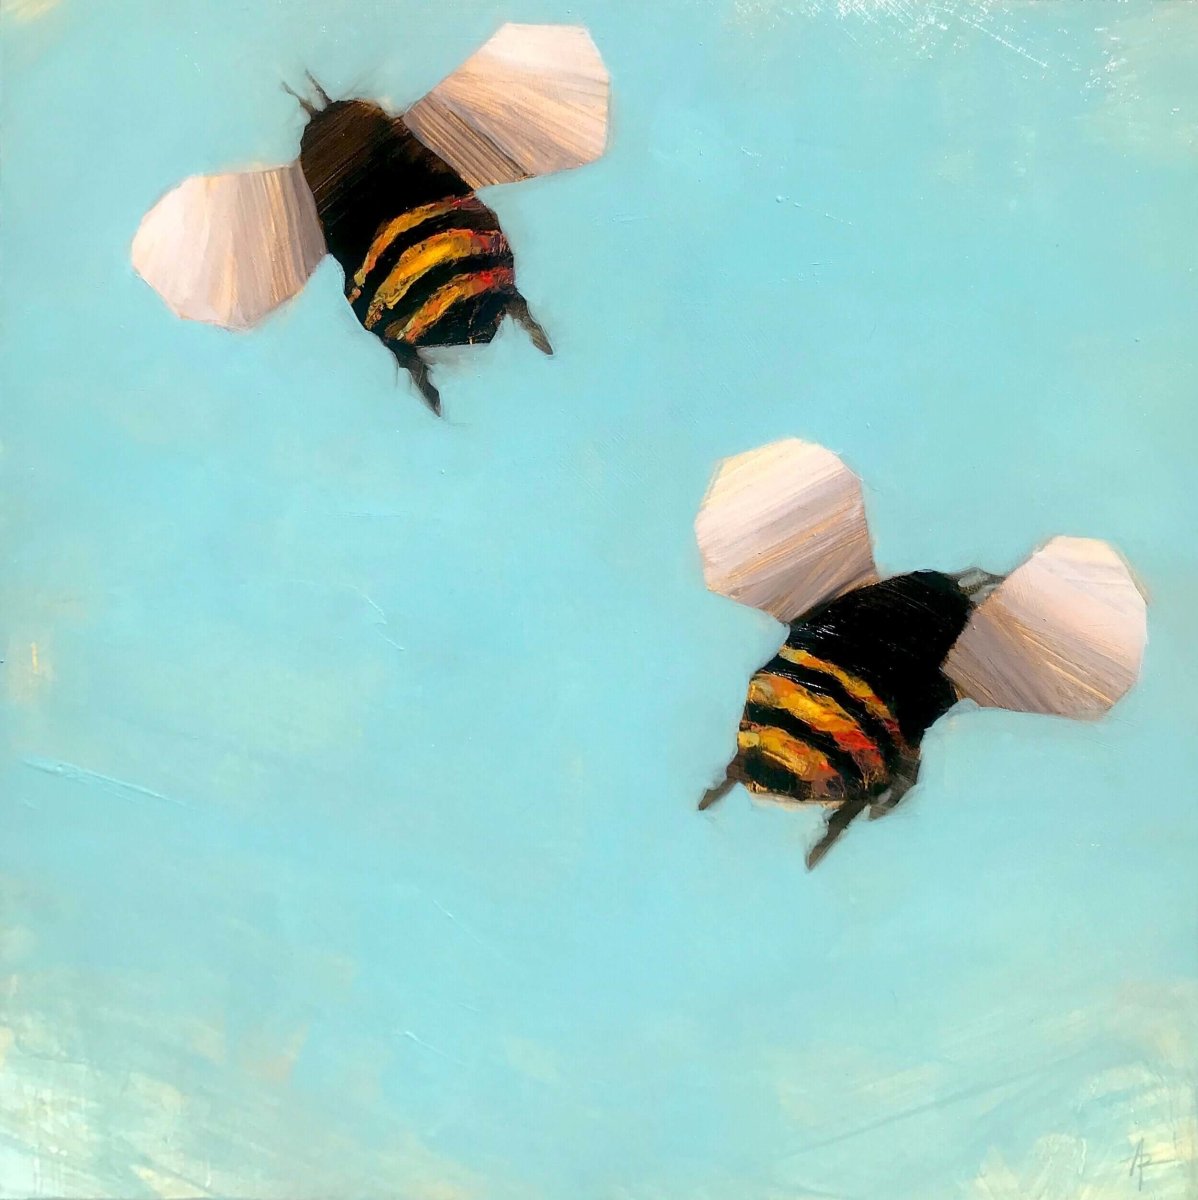 Bees 2-25 by Angie Renfro at LePrince Galleries